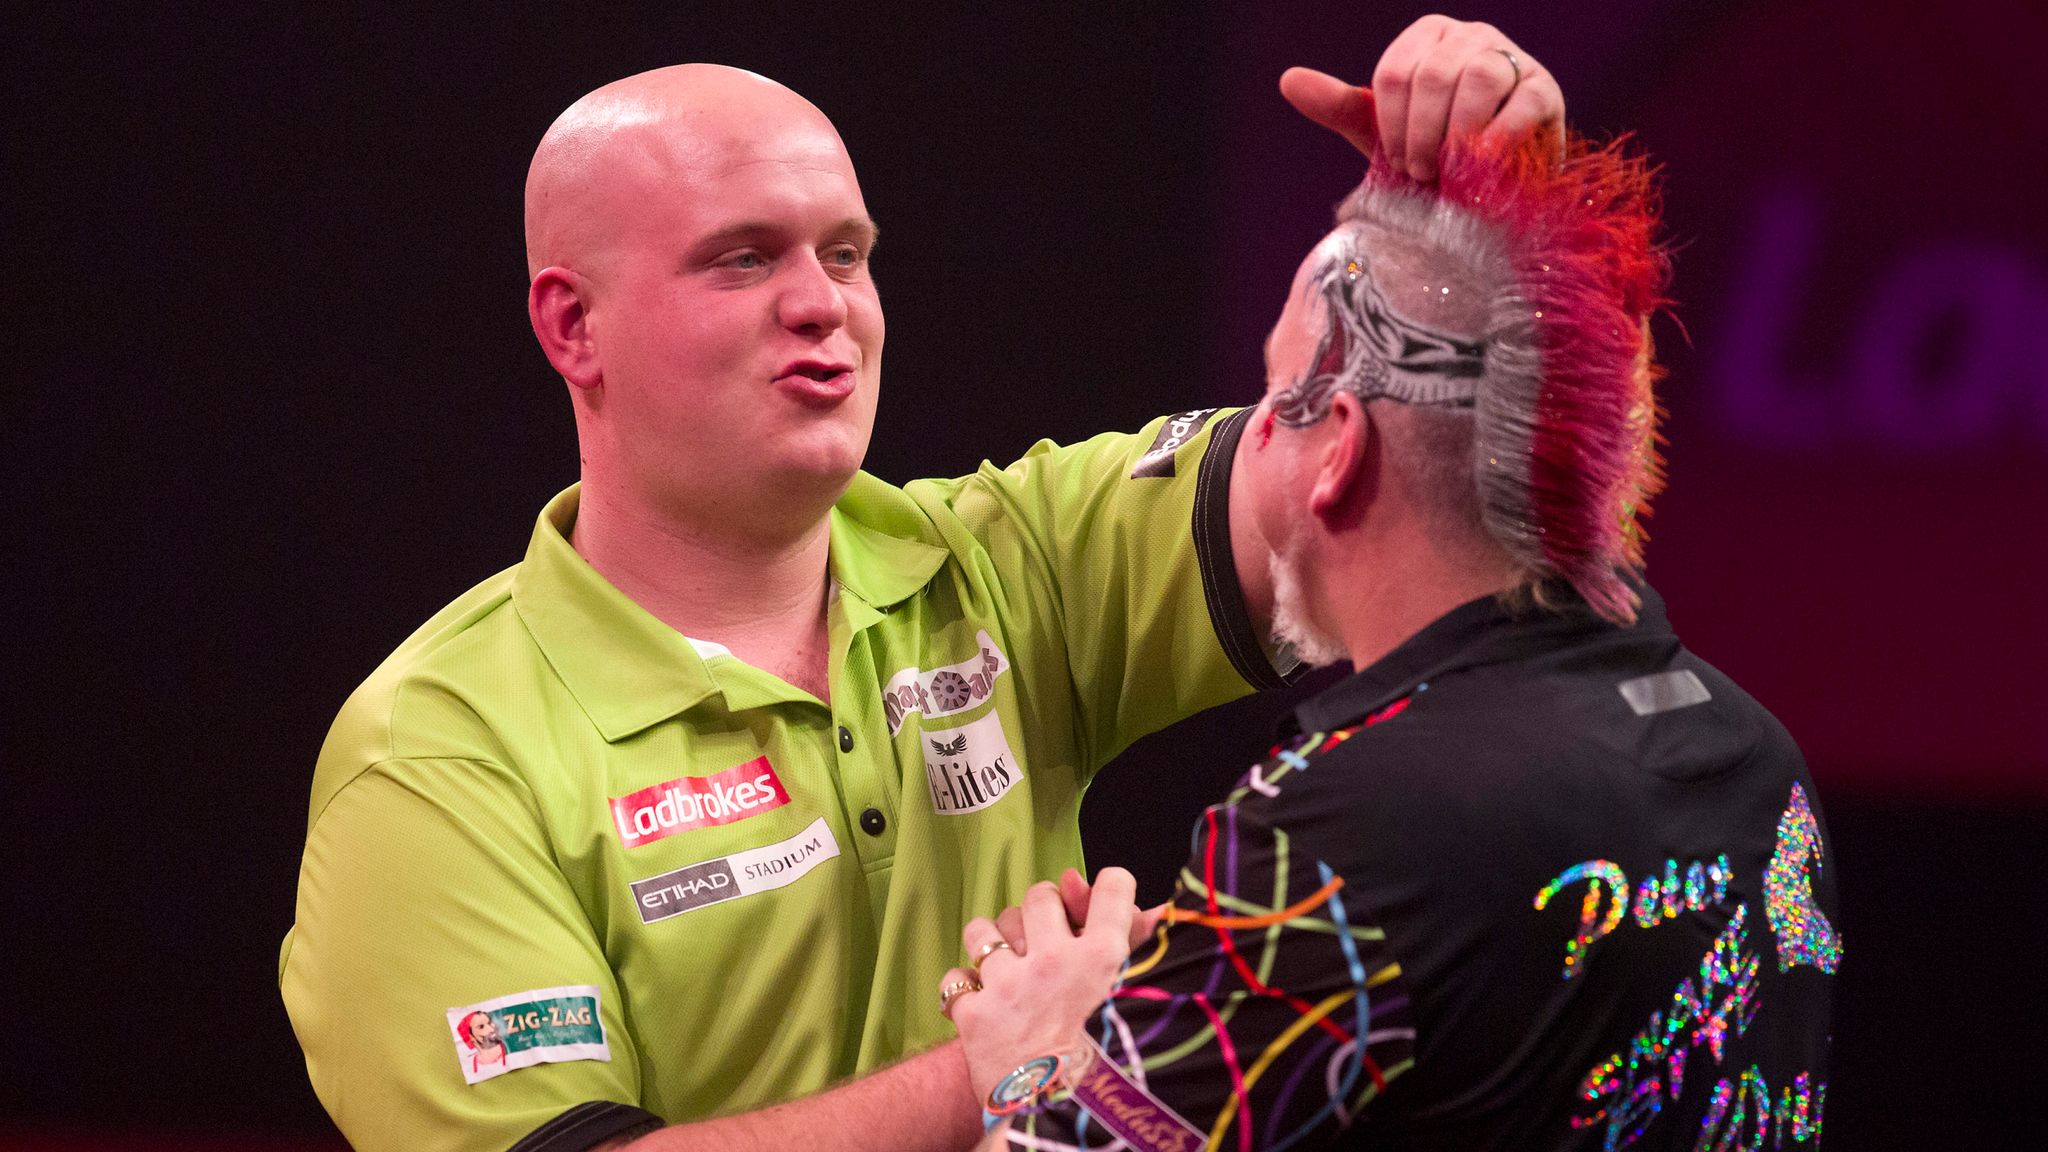 PDC Peter Wright has to overcome Michael van history to claim ultimate prize | Darts News | Sky Sports